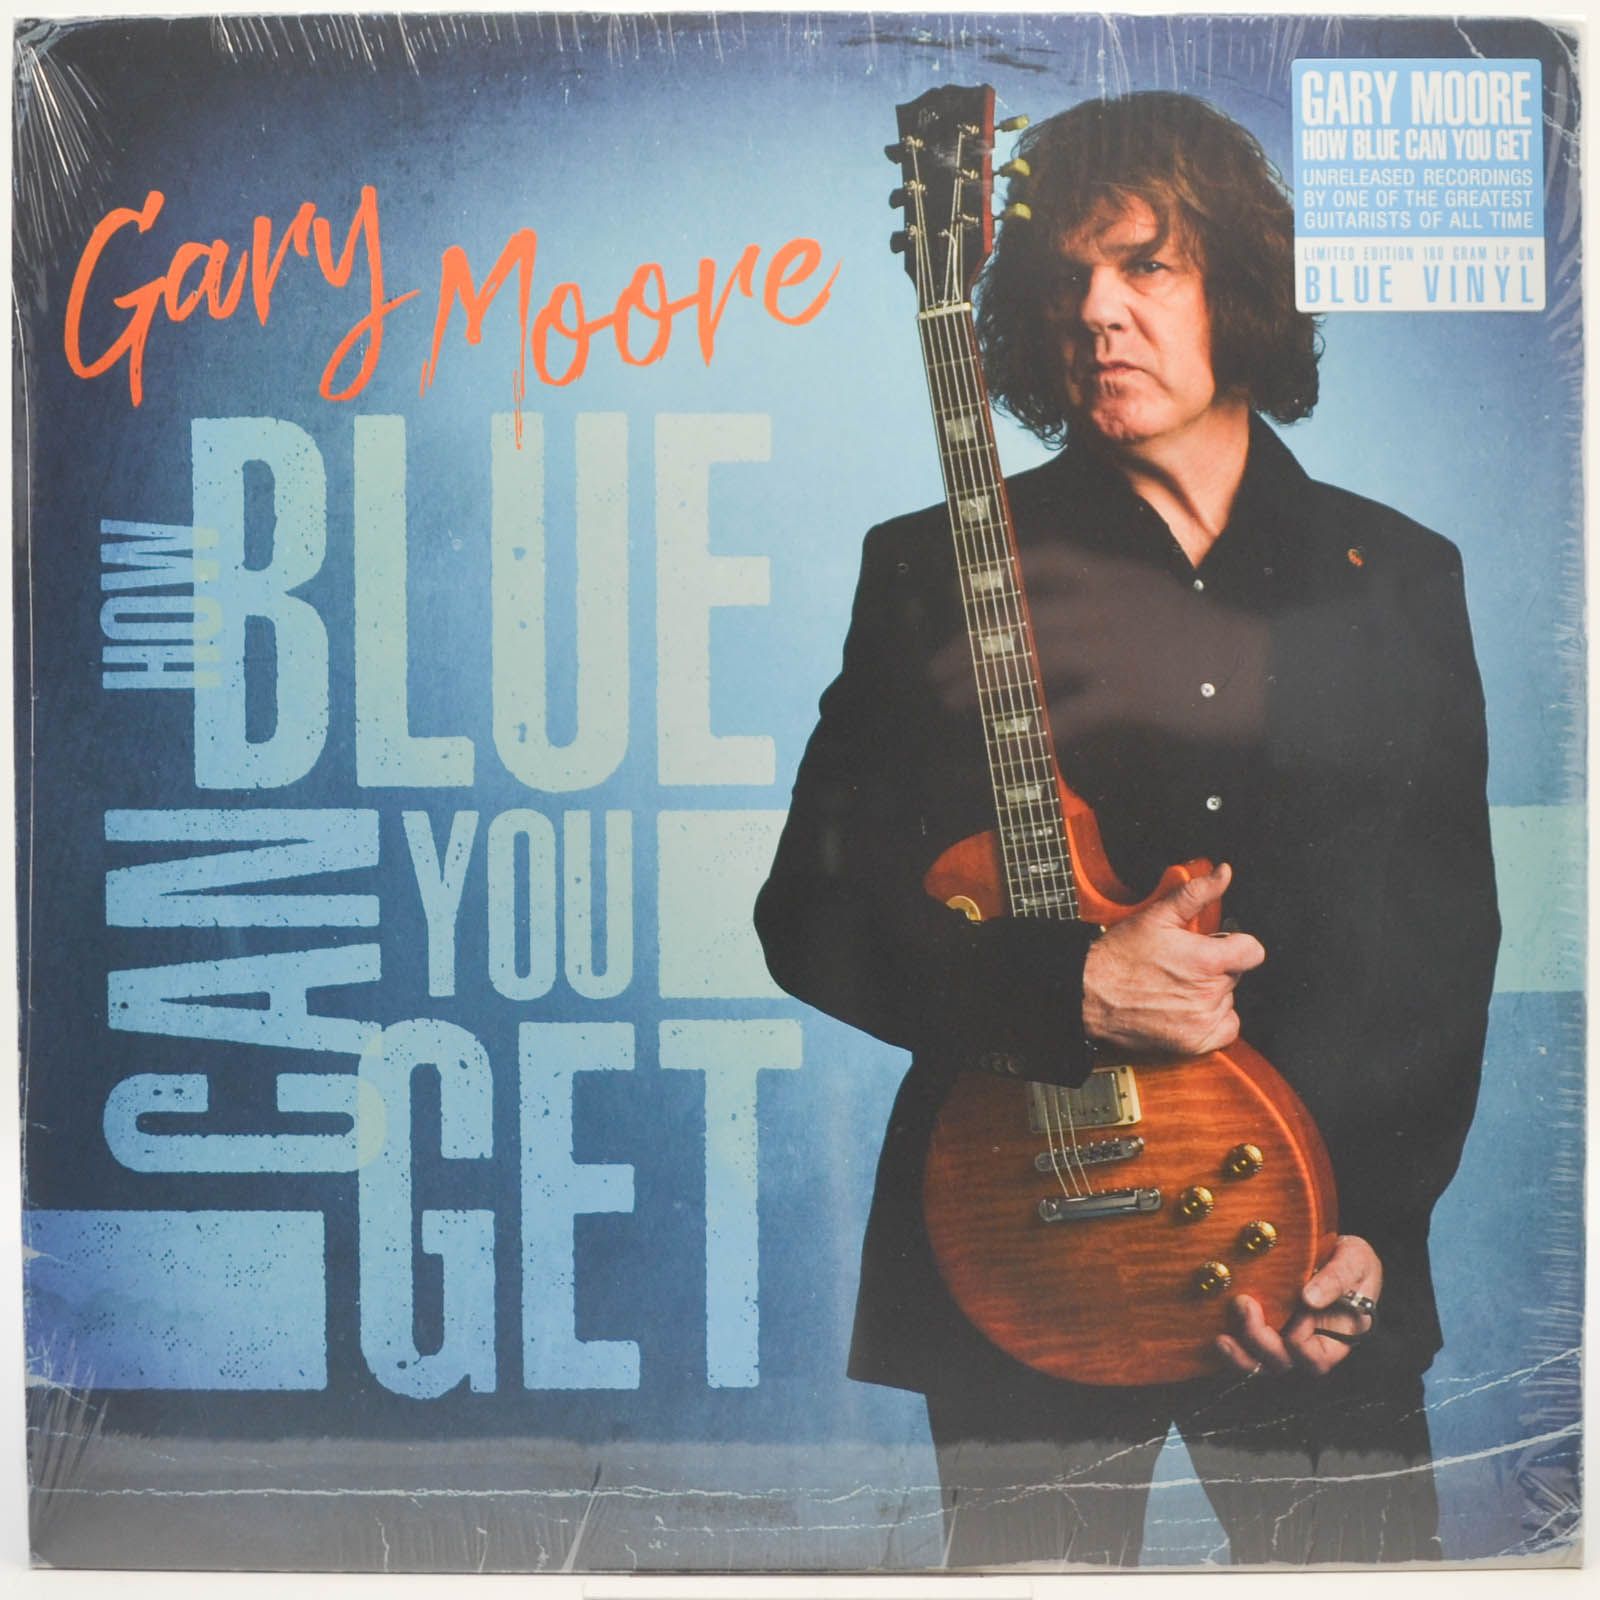 Gary Moore — How Blue Can You Get, 2021